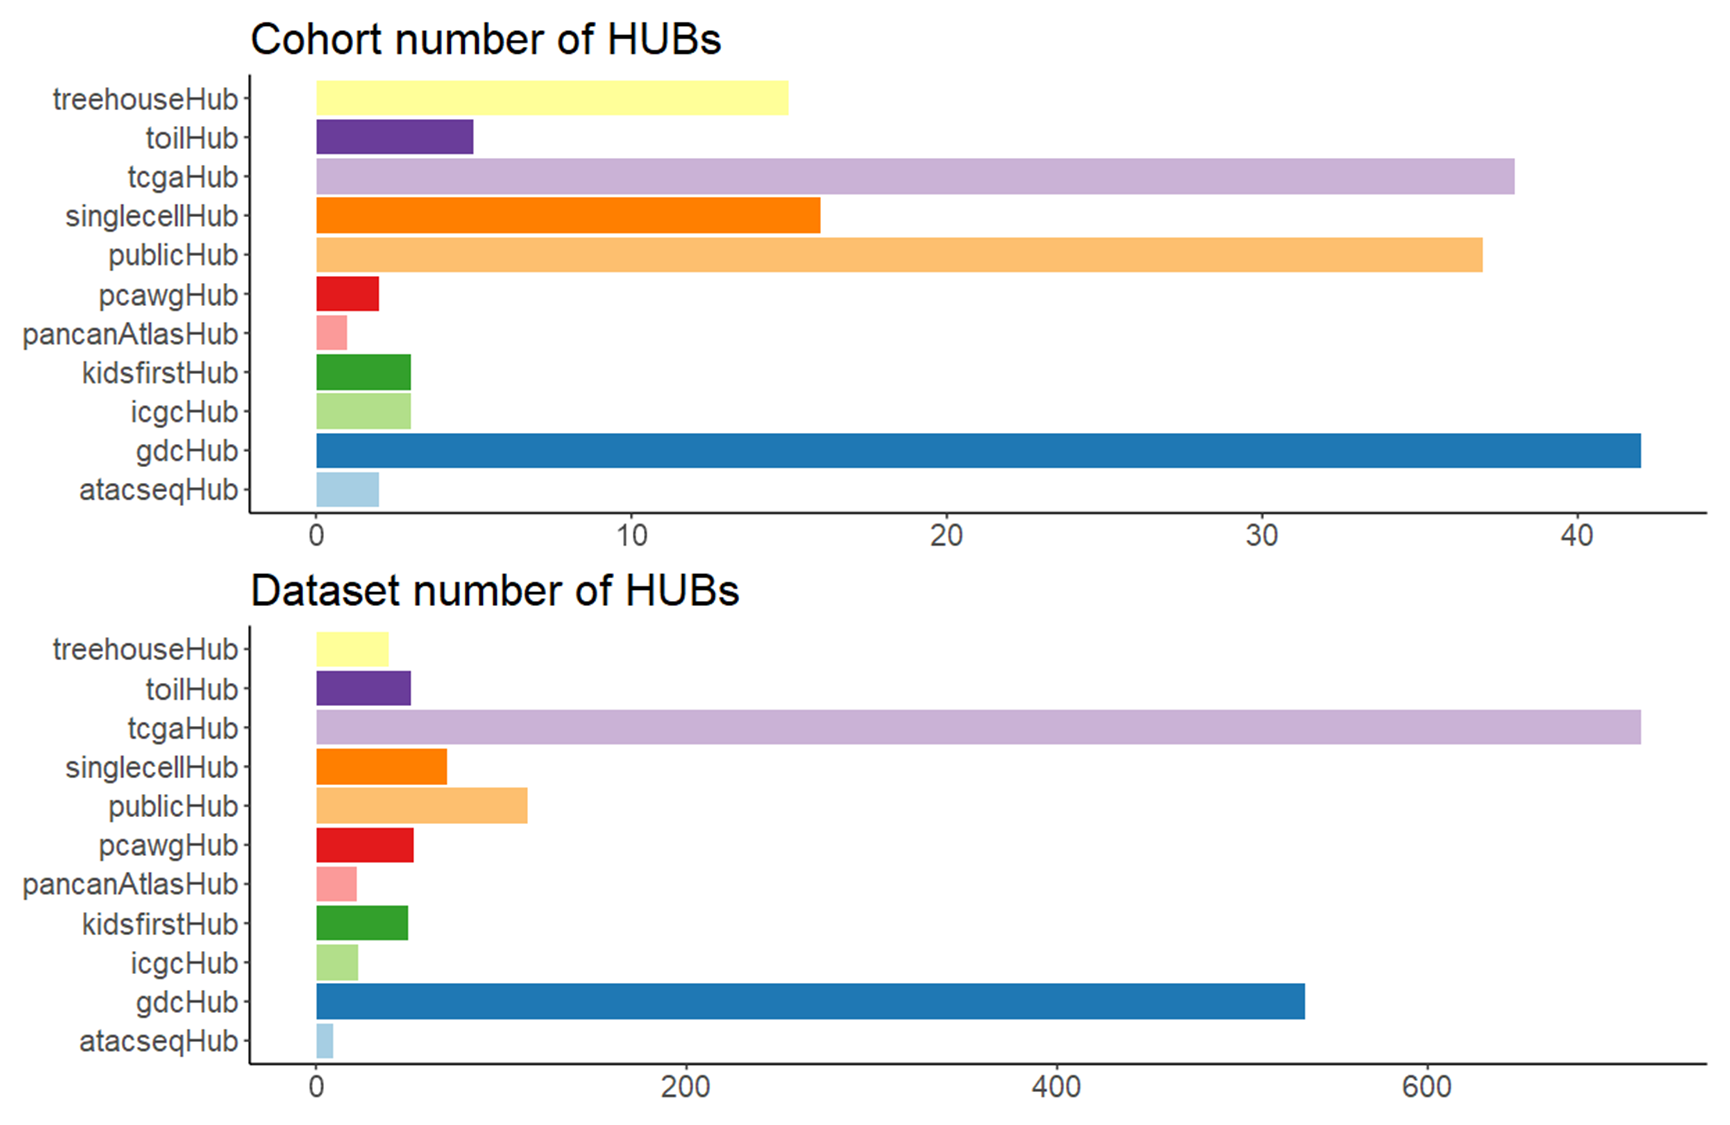 The statitics for cohorts and datasets of each data hub